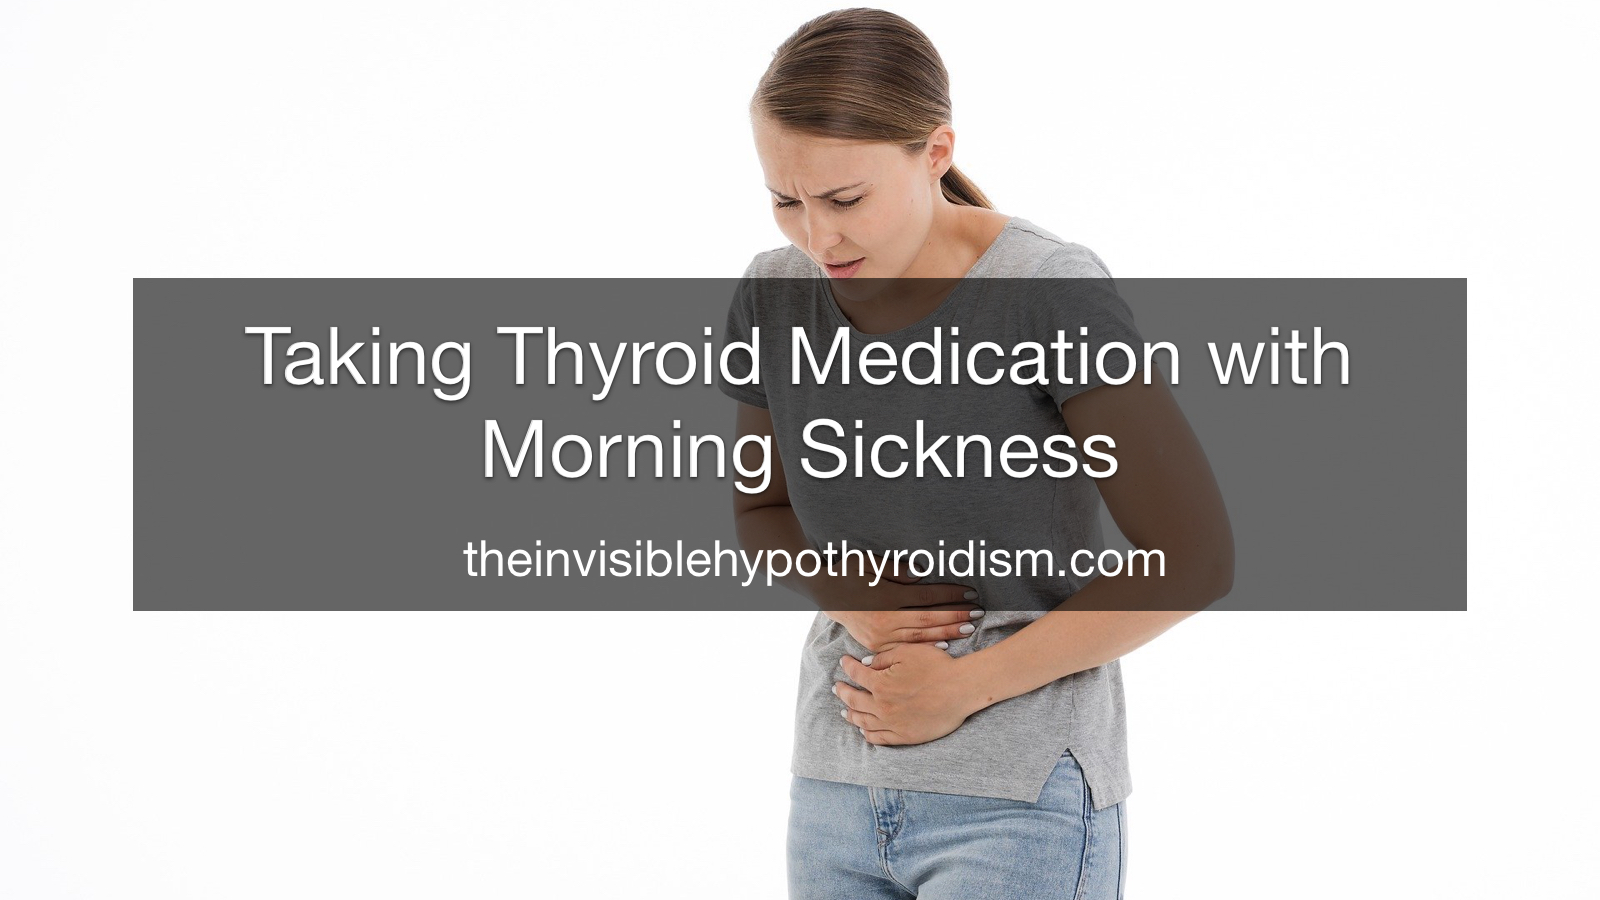 Taking Thyroid Medication with Morning Sickness